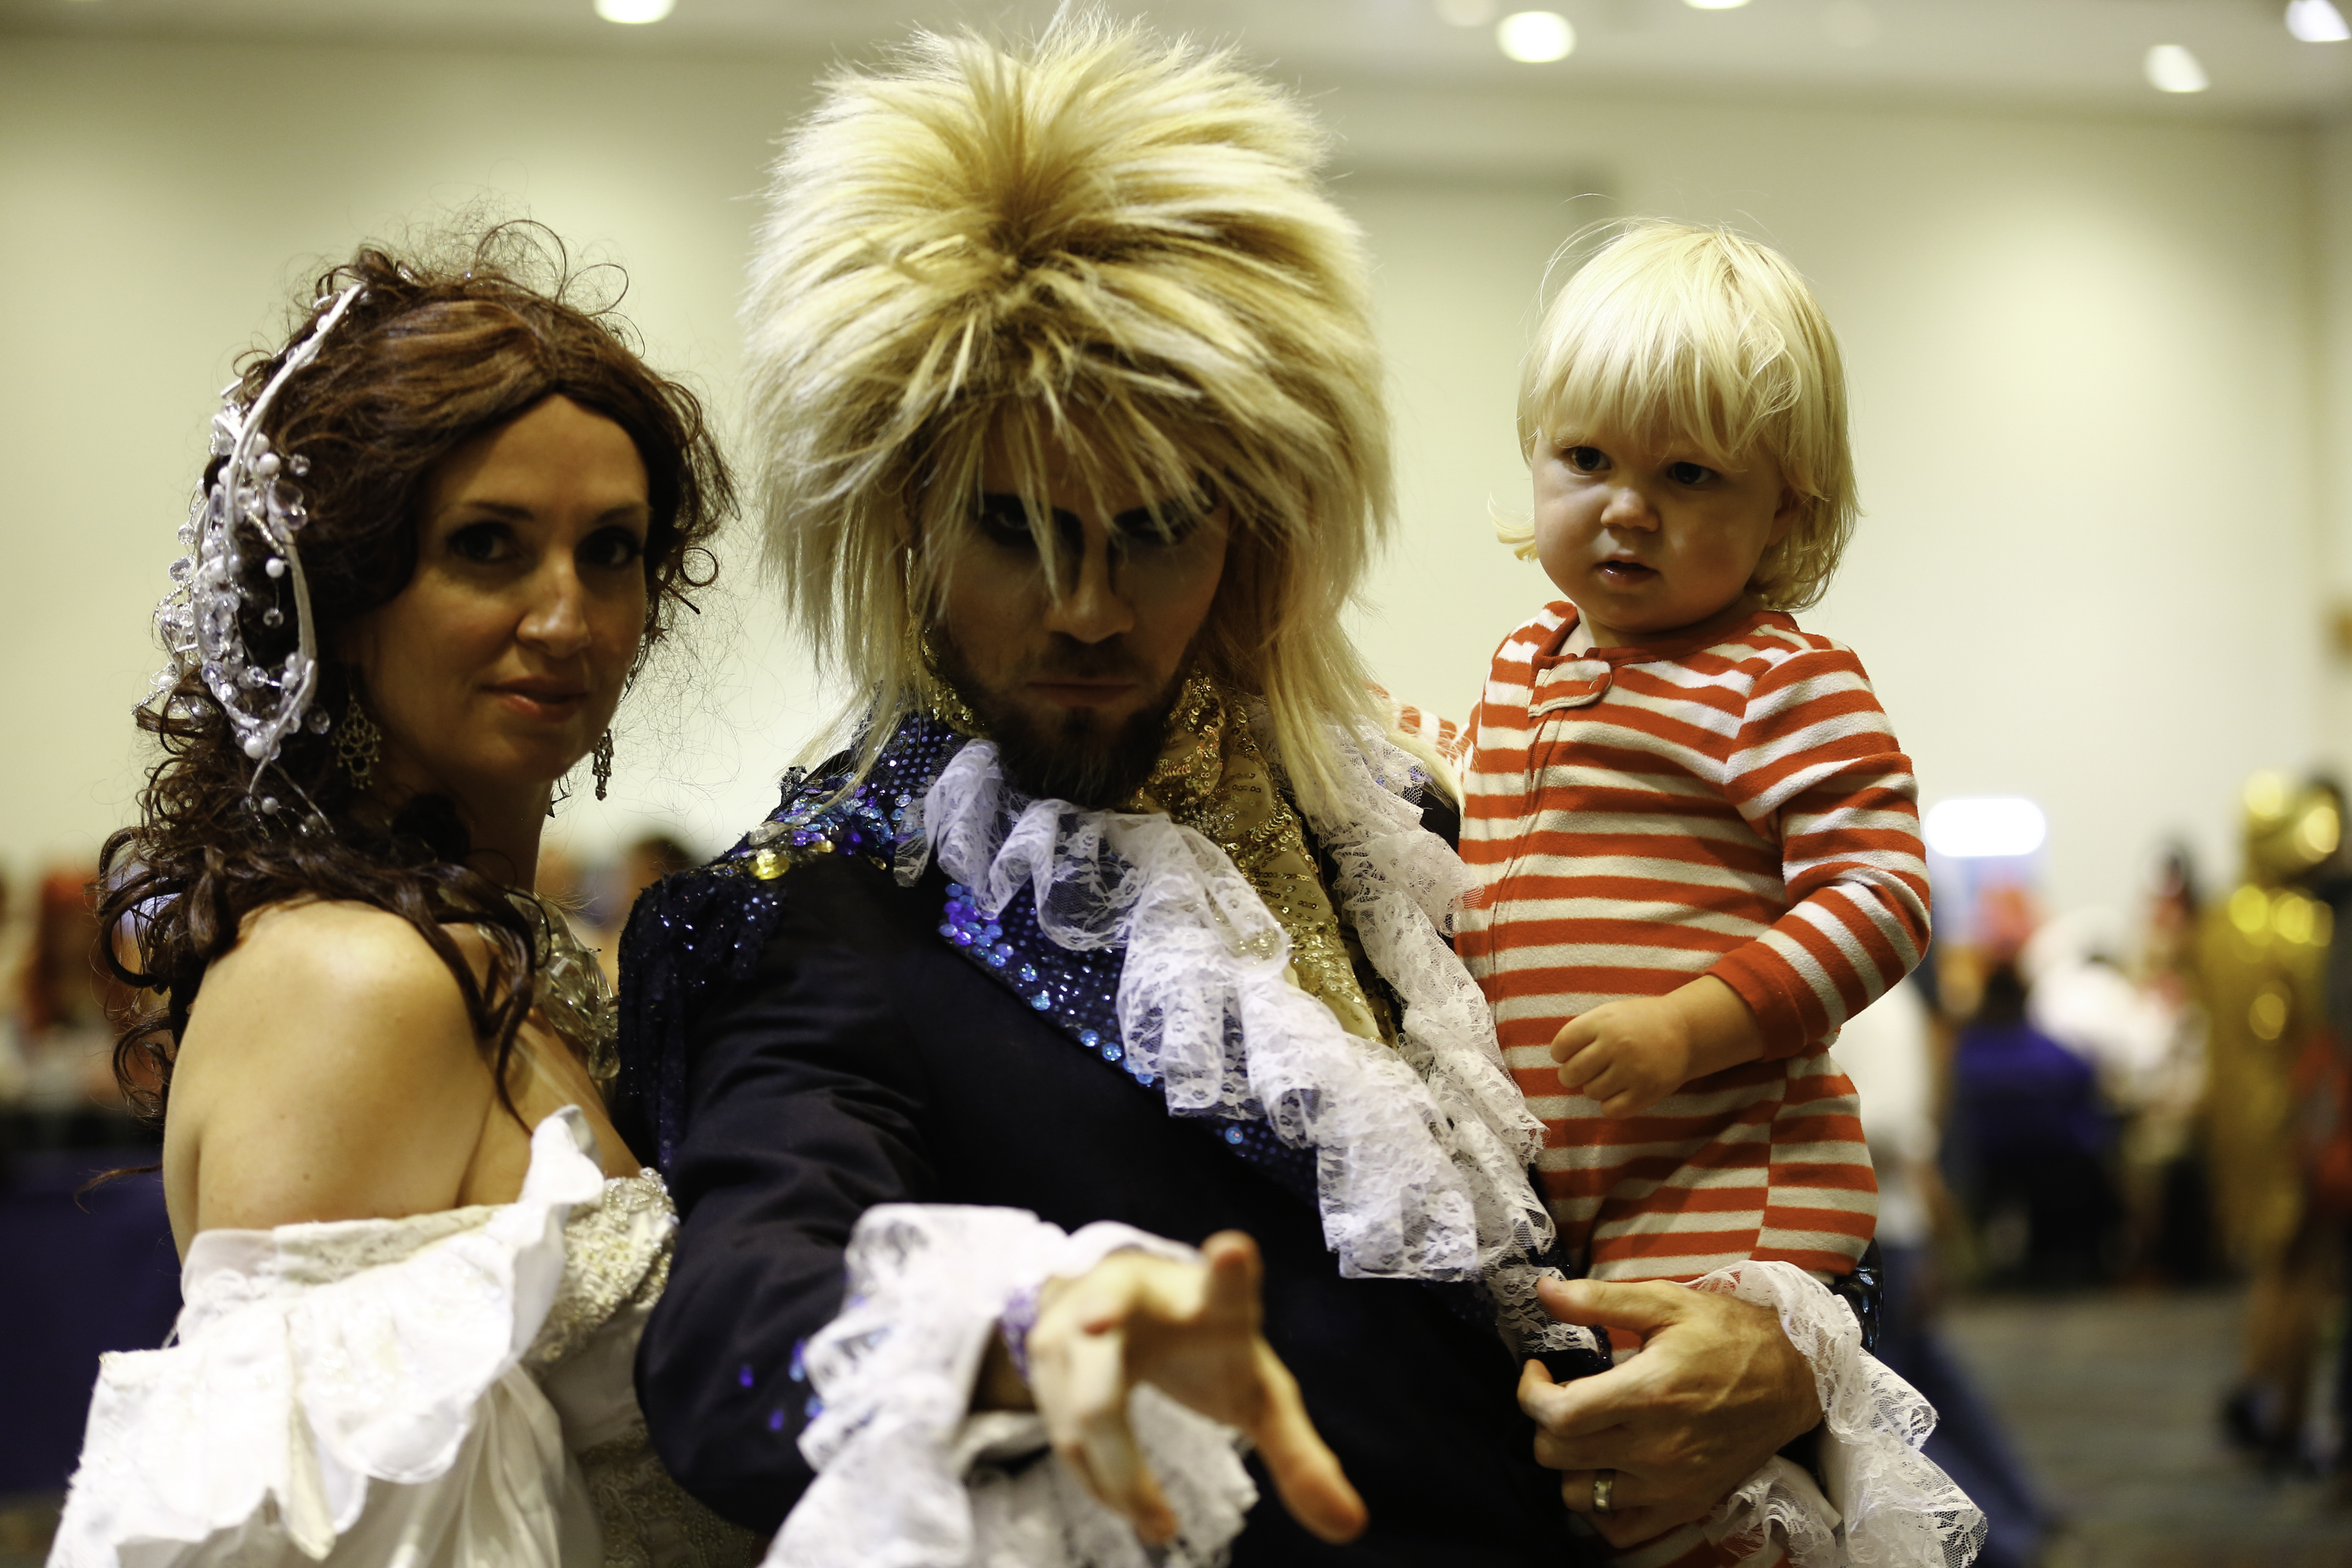 A family dressed as Sarah Williams, Jareth the Goblin Kind and Toby from Labyrinth.